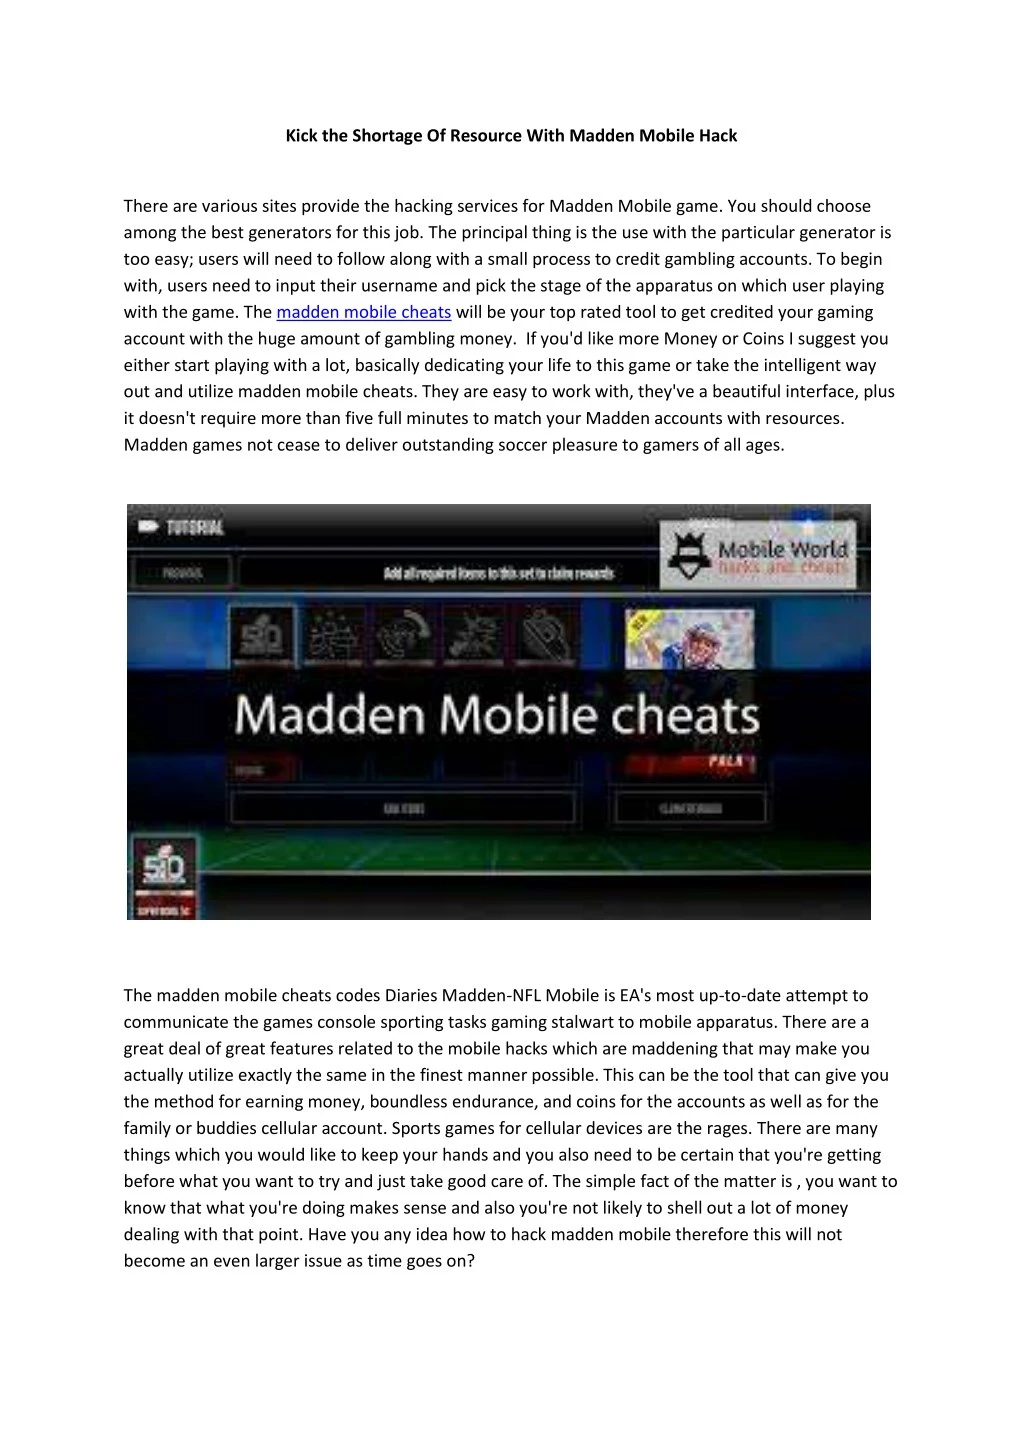 kick the shortage of resource with madden mobile